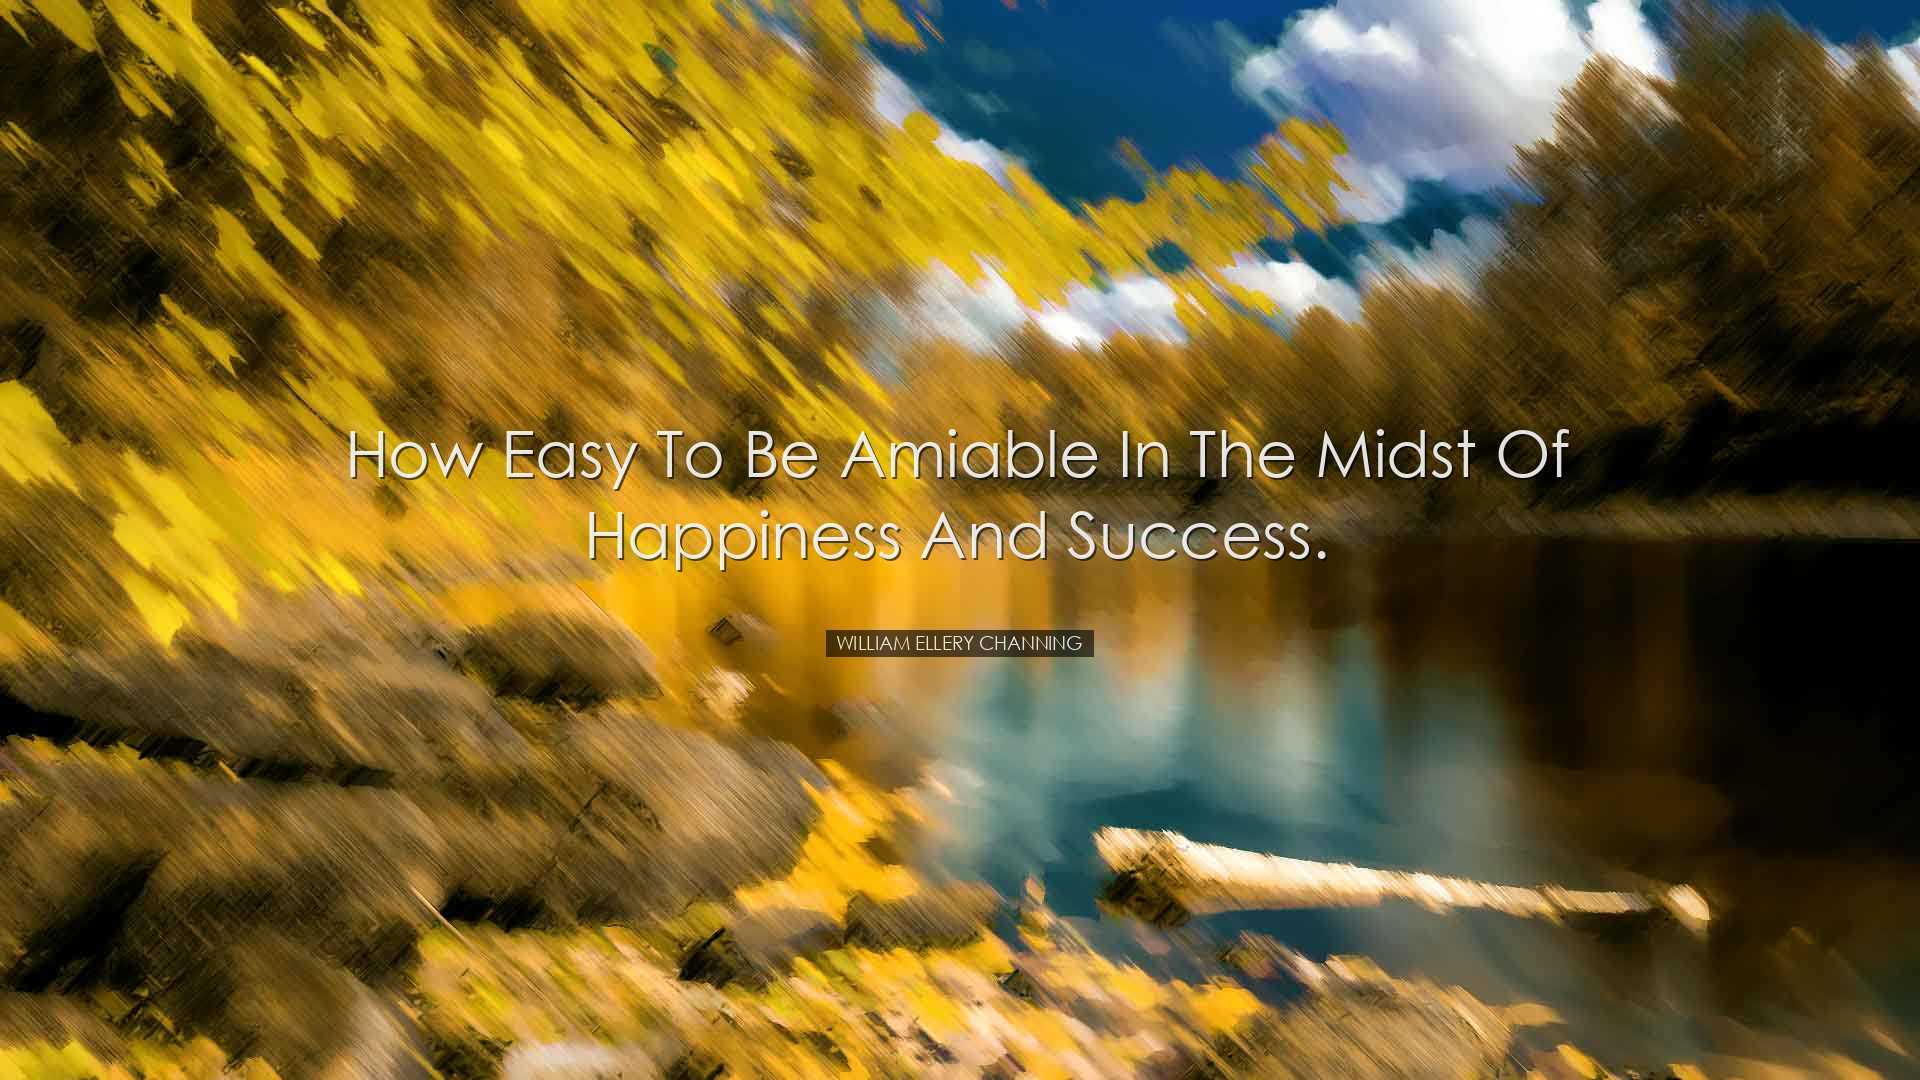 How easy to be amiable in the midst of happiness and success. - Wi